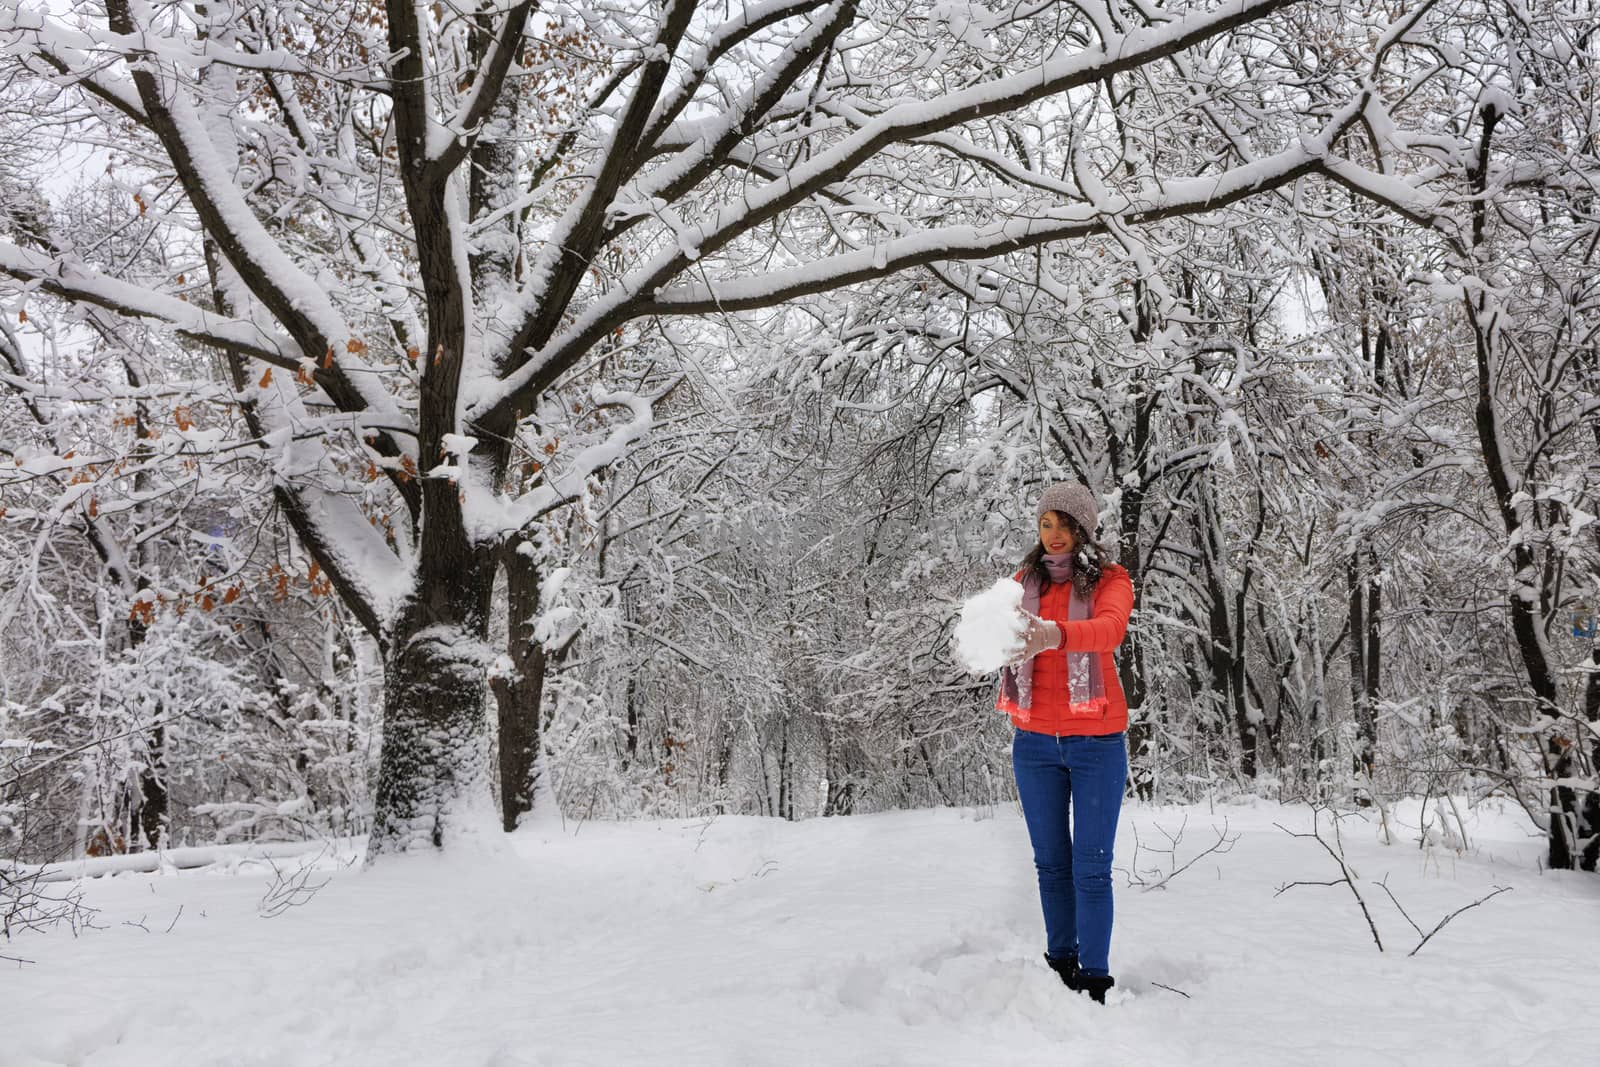 A young beautiful woman in a bright coral-colored jacket and blue jeans walks in the winter through the snow-covered fairy-tale forest near a branchy, snow-covered, perennial old oak tree and makes a large snowball.